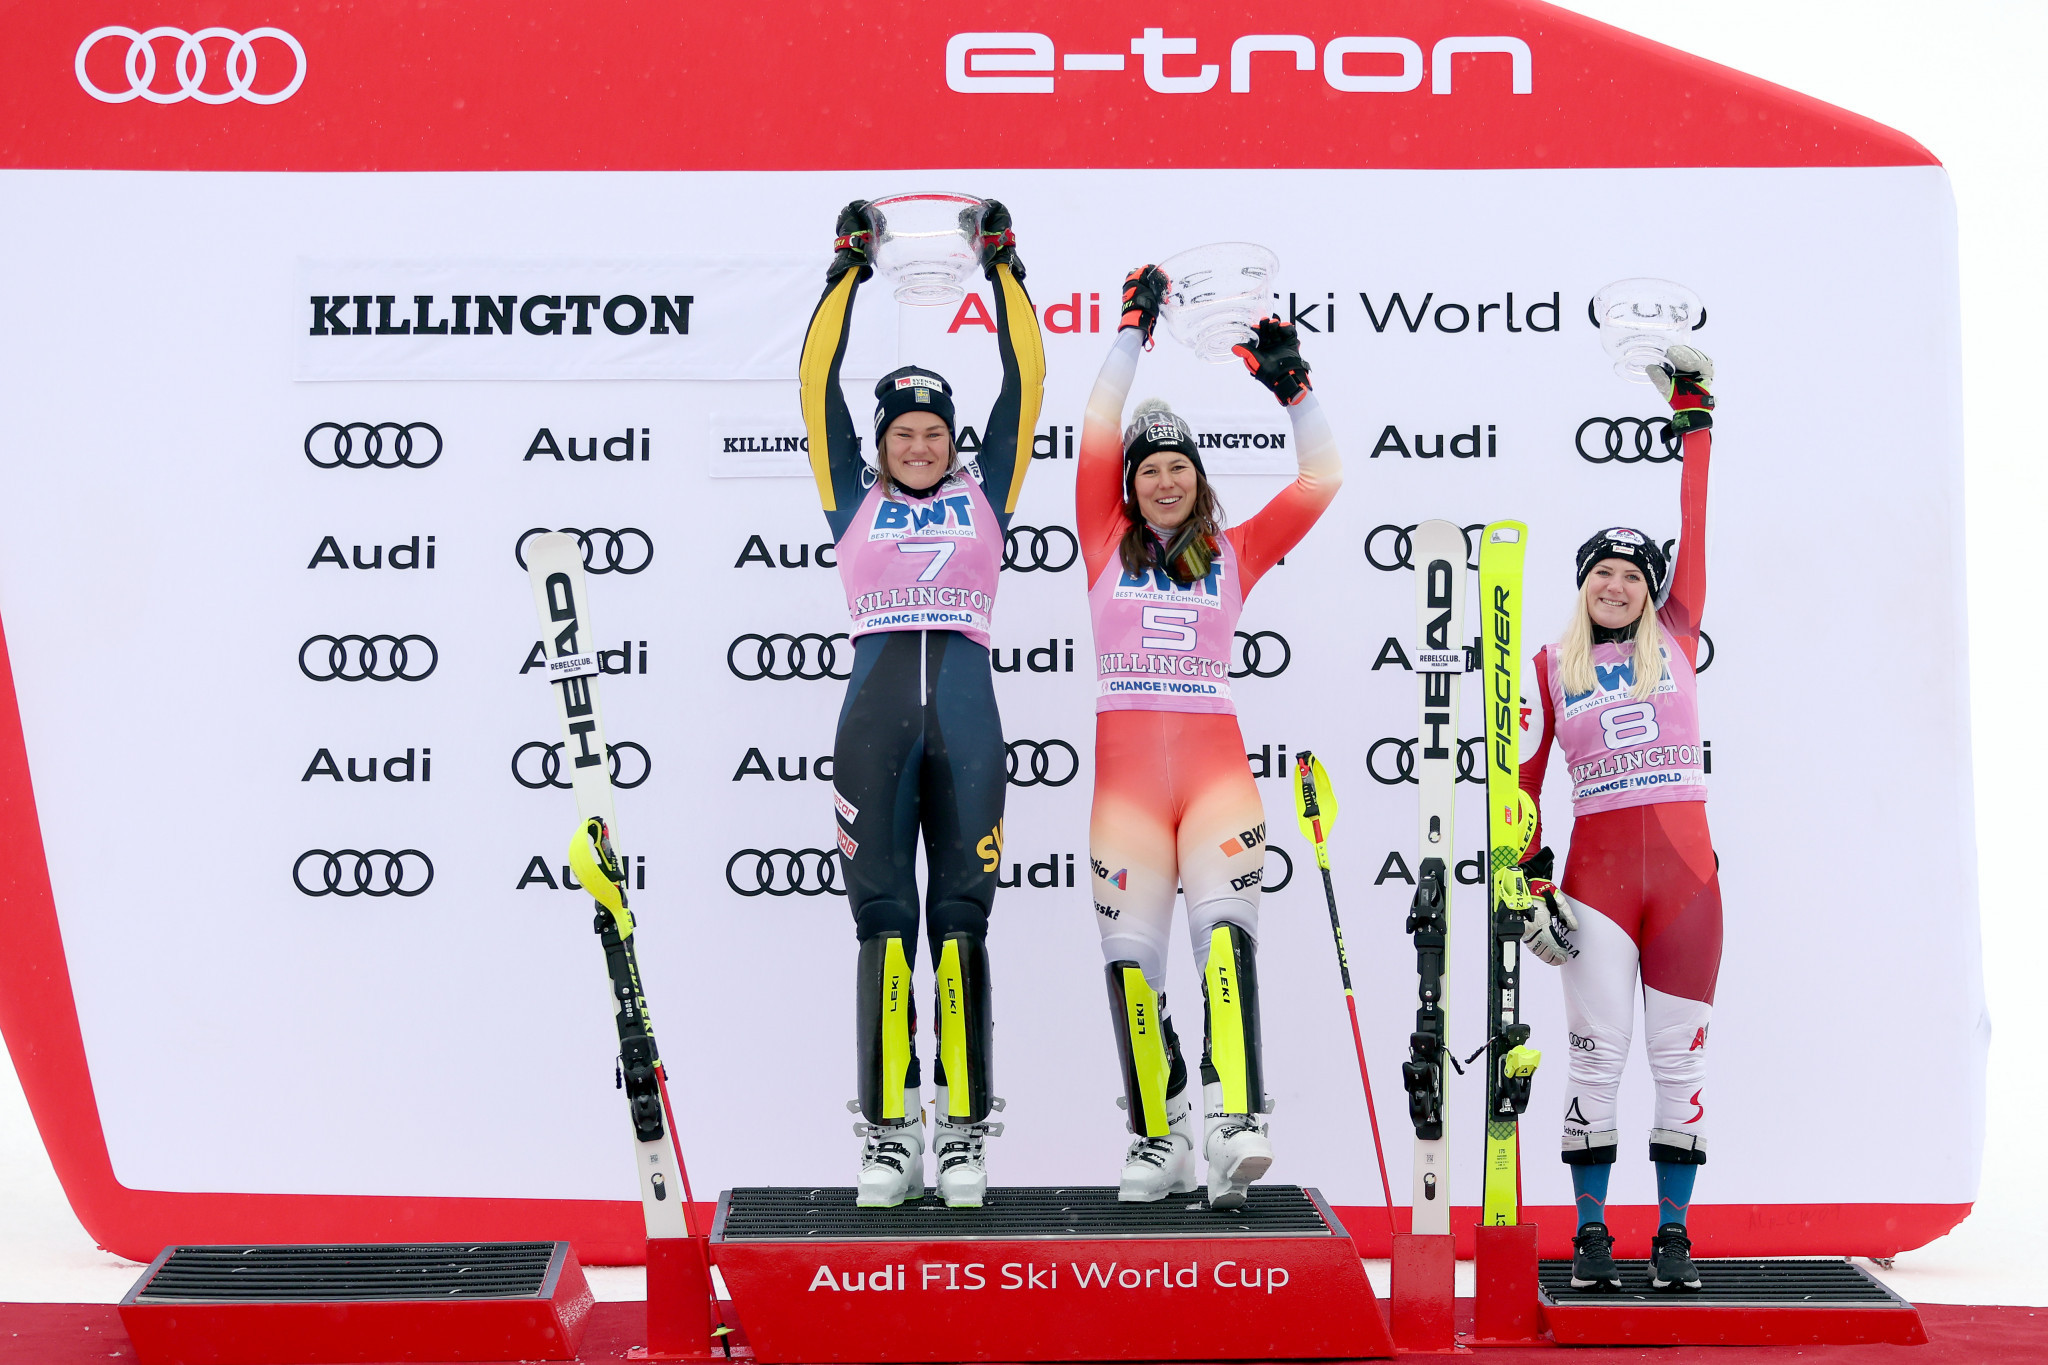 Wendy Holdener, centre, and Anna Swenn Larsson claimed a joint gold at the FIS Alpine Skiing World Cup in Killington ©Getty Images